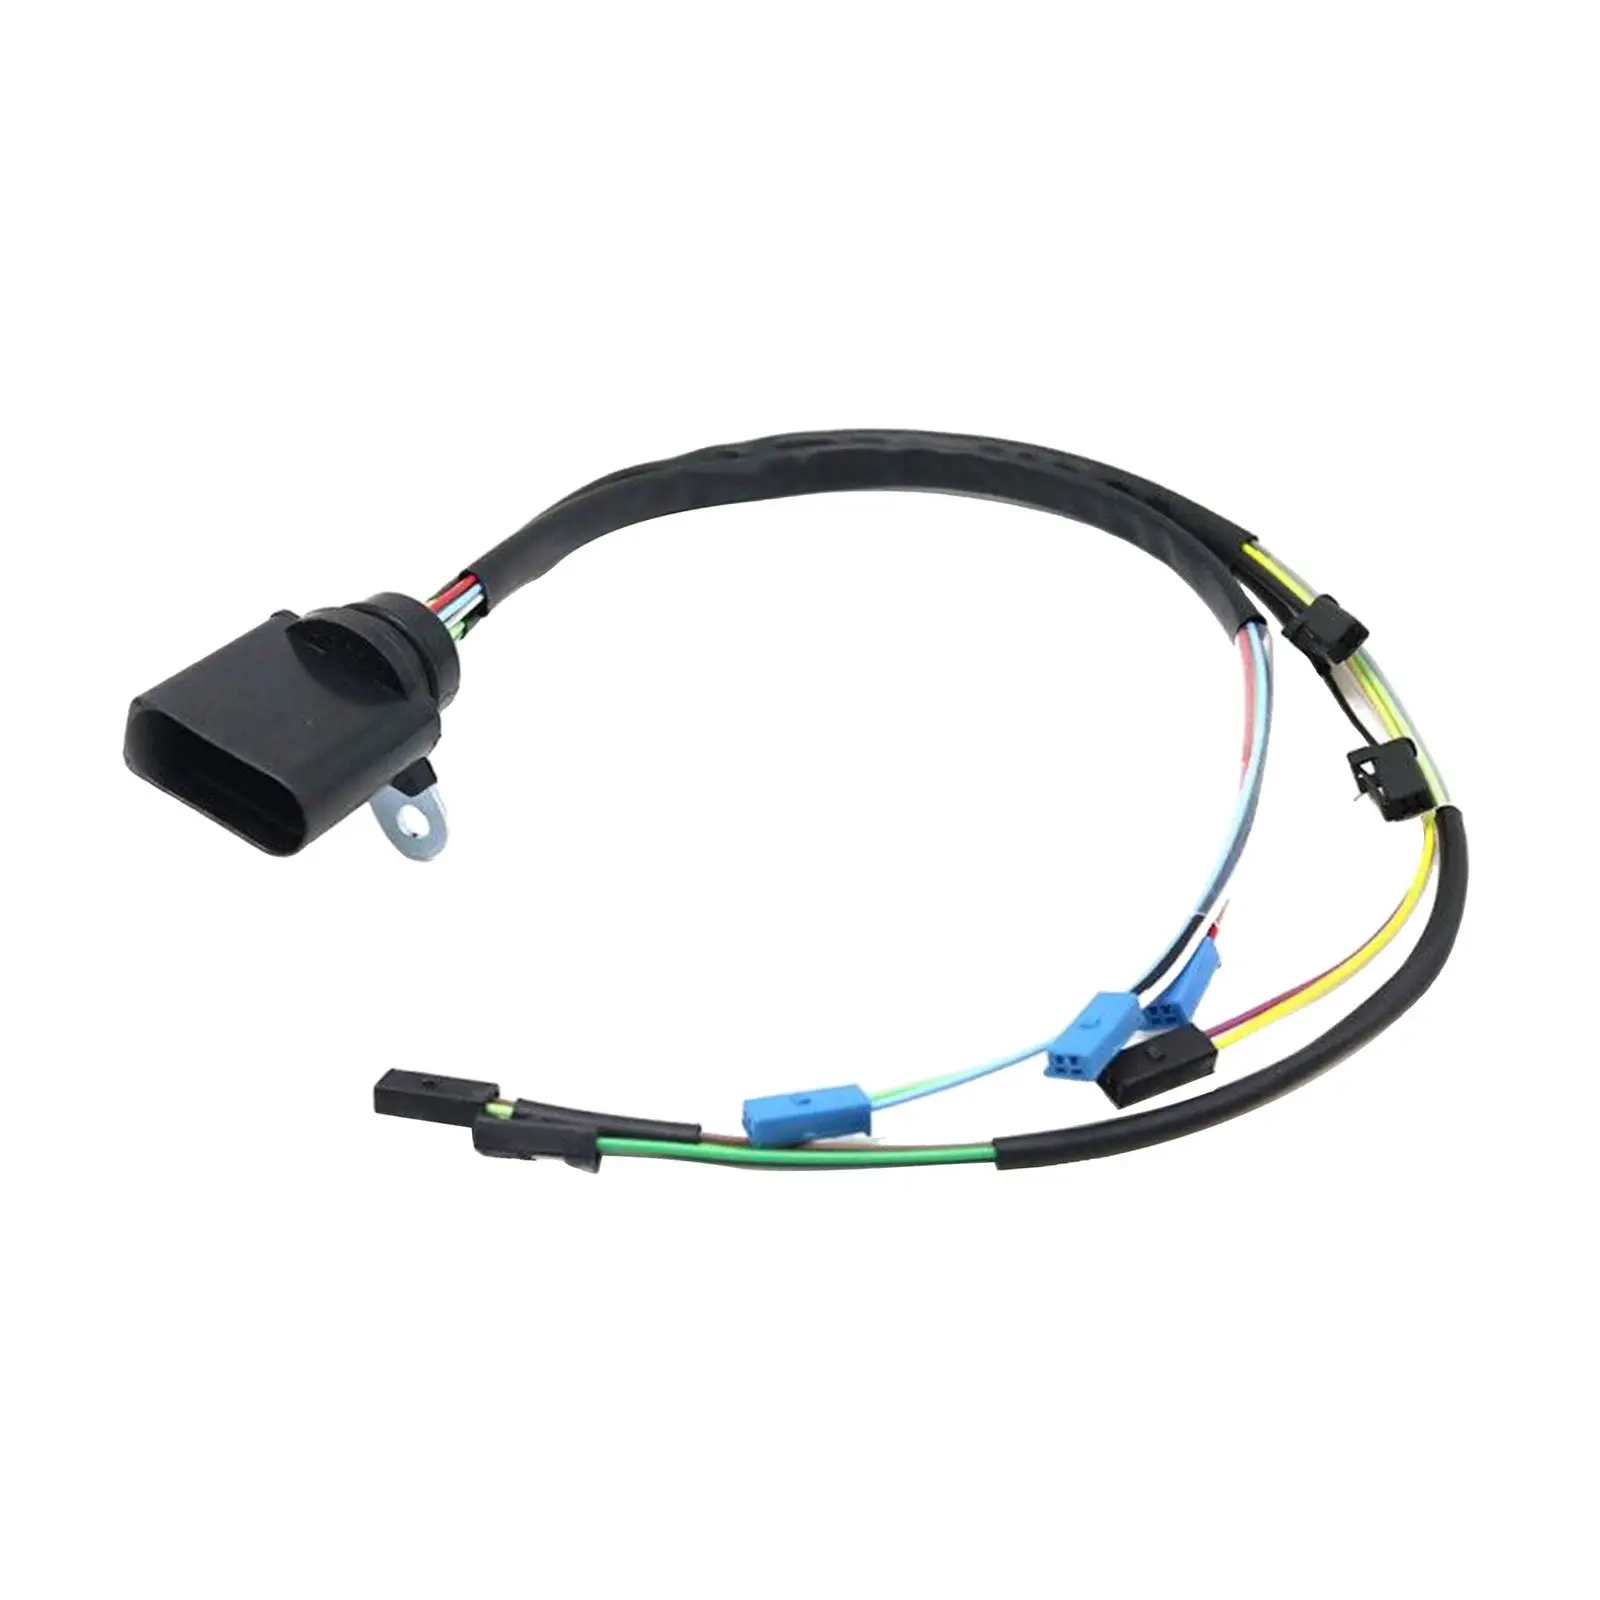 

Auto 14 Pin Harness Wiring for 09G Transmission for VW JETTA PASSAT for AUDI Seat Skoda 09G927363B 09G927363A 09G927363